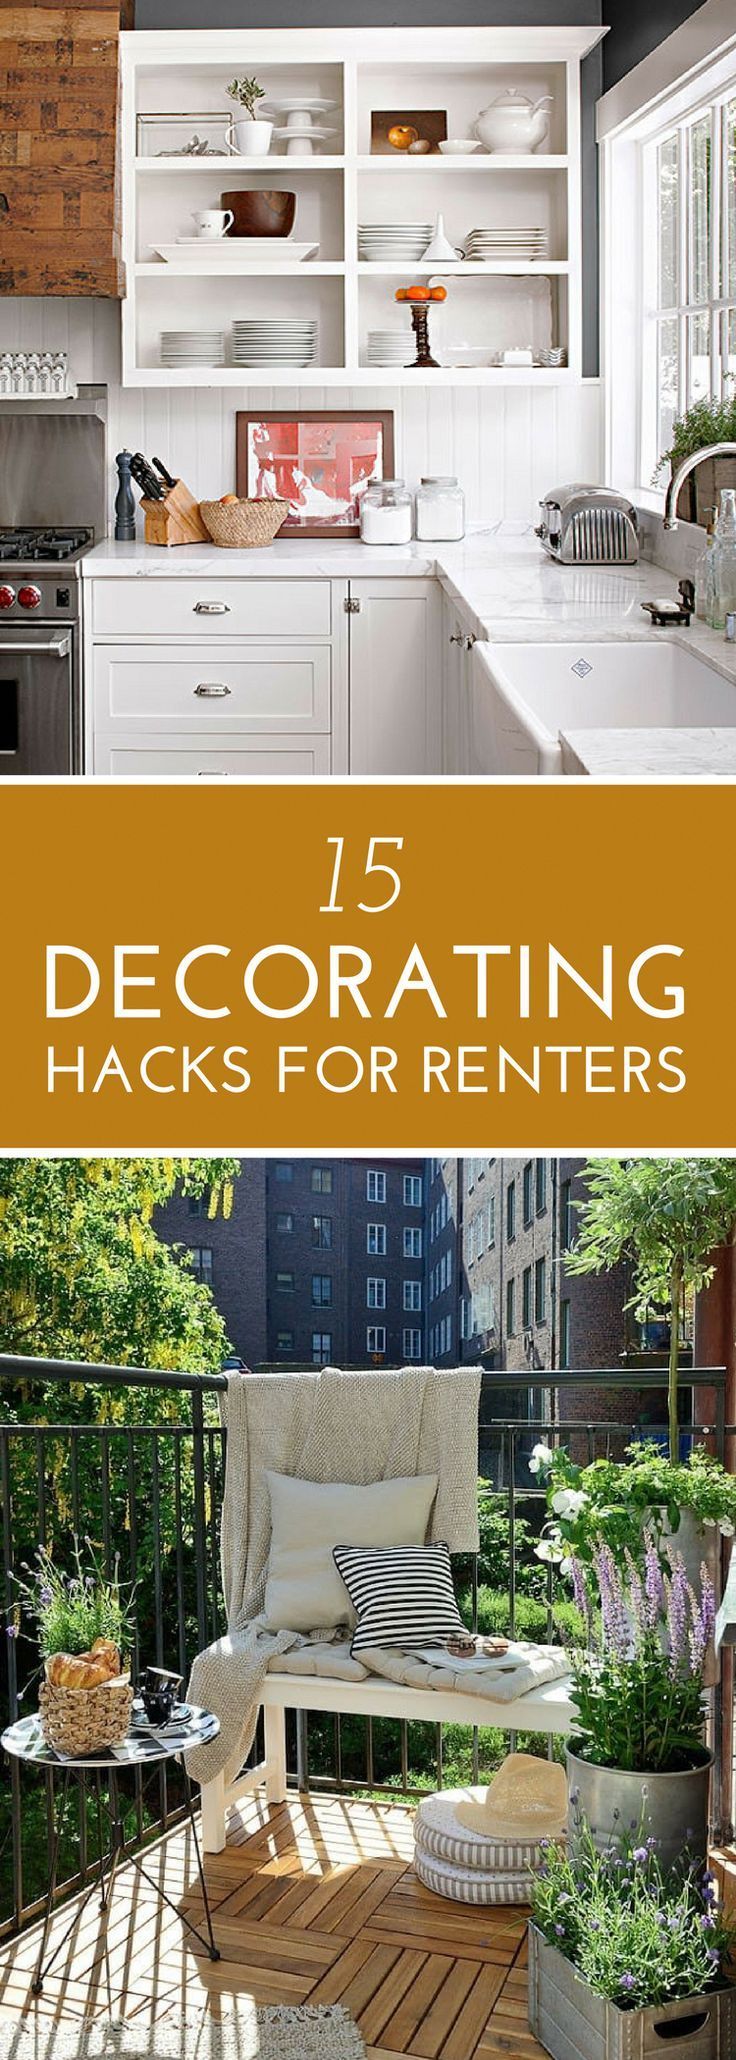 15 Decorating Hacks for Renters (That Won't Cost You Your Security Deposit) -   diy Apartment decor for renters